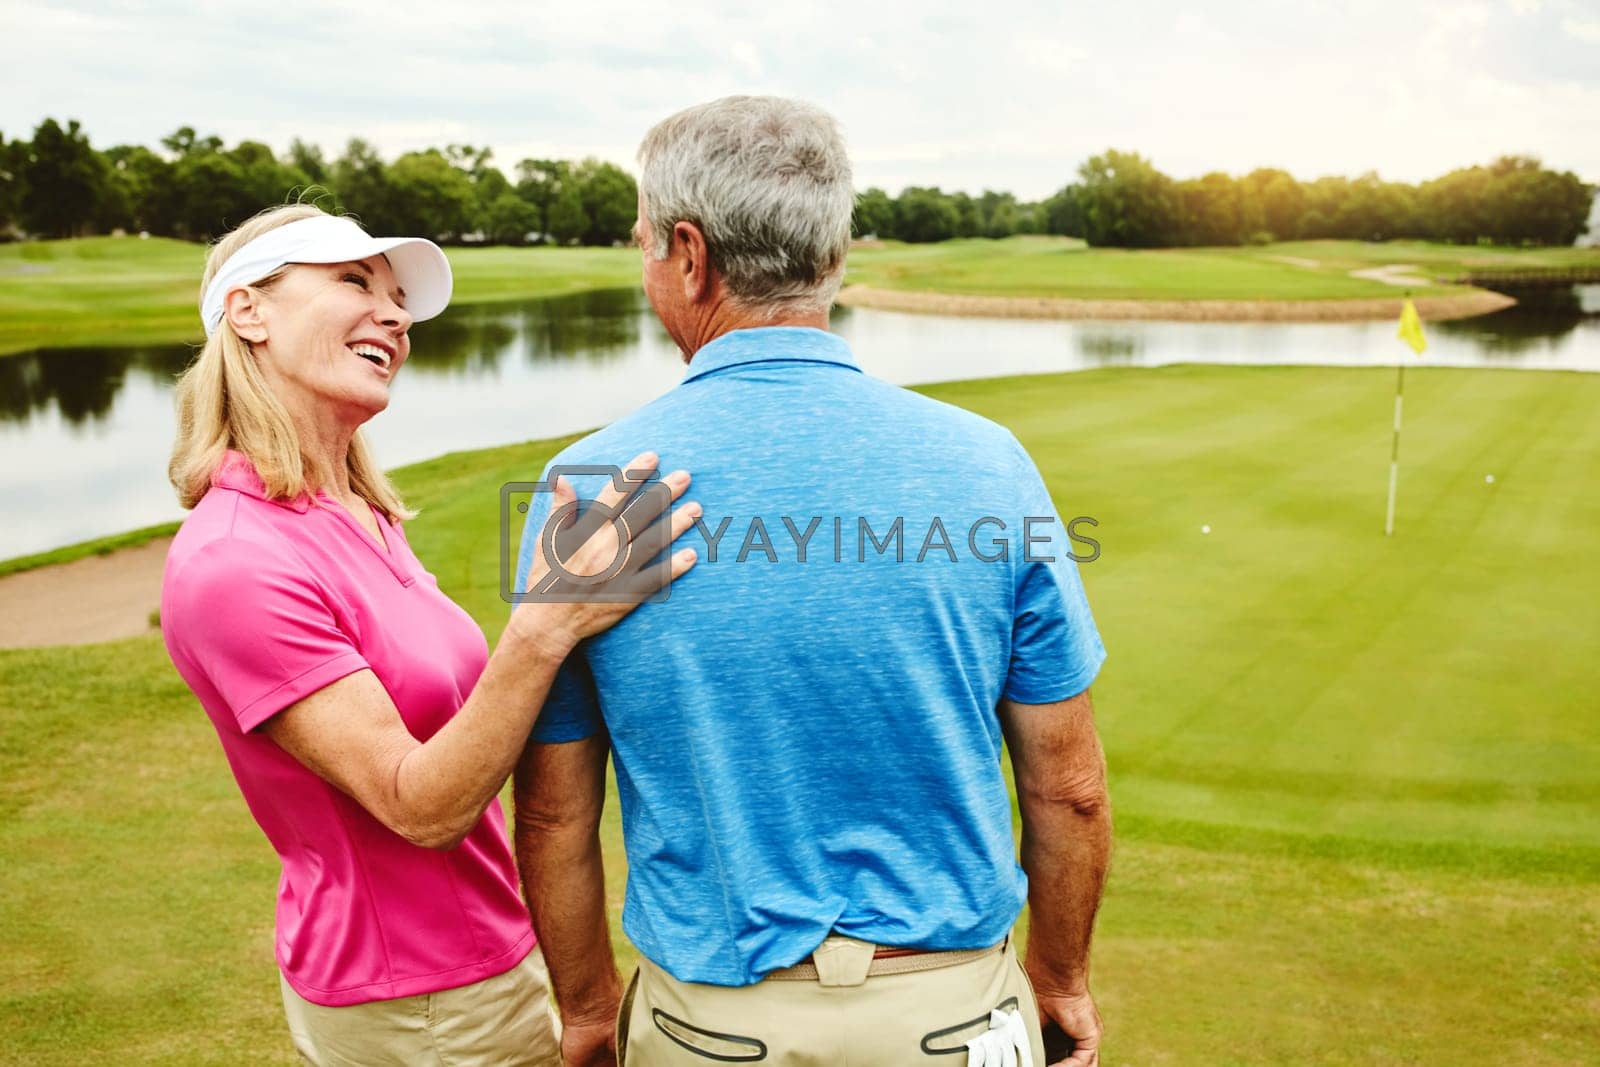 Royalty free image of Spending the whole day attached at the hip. a mature couple out playing golf together. by YuriArcurs